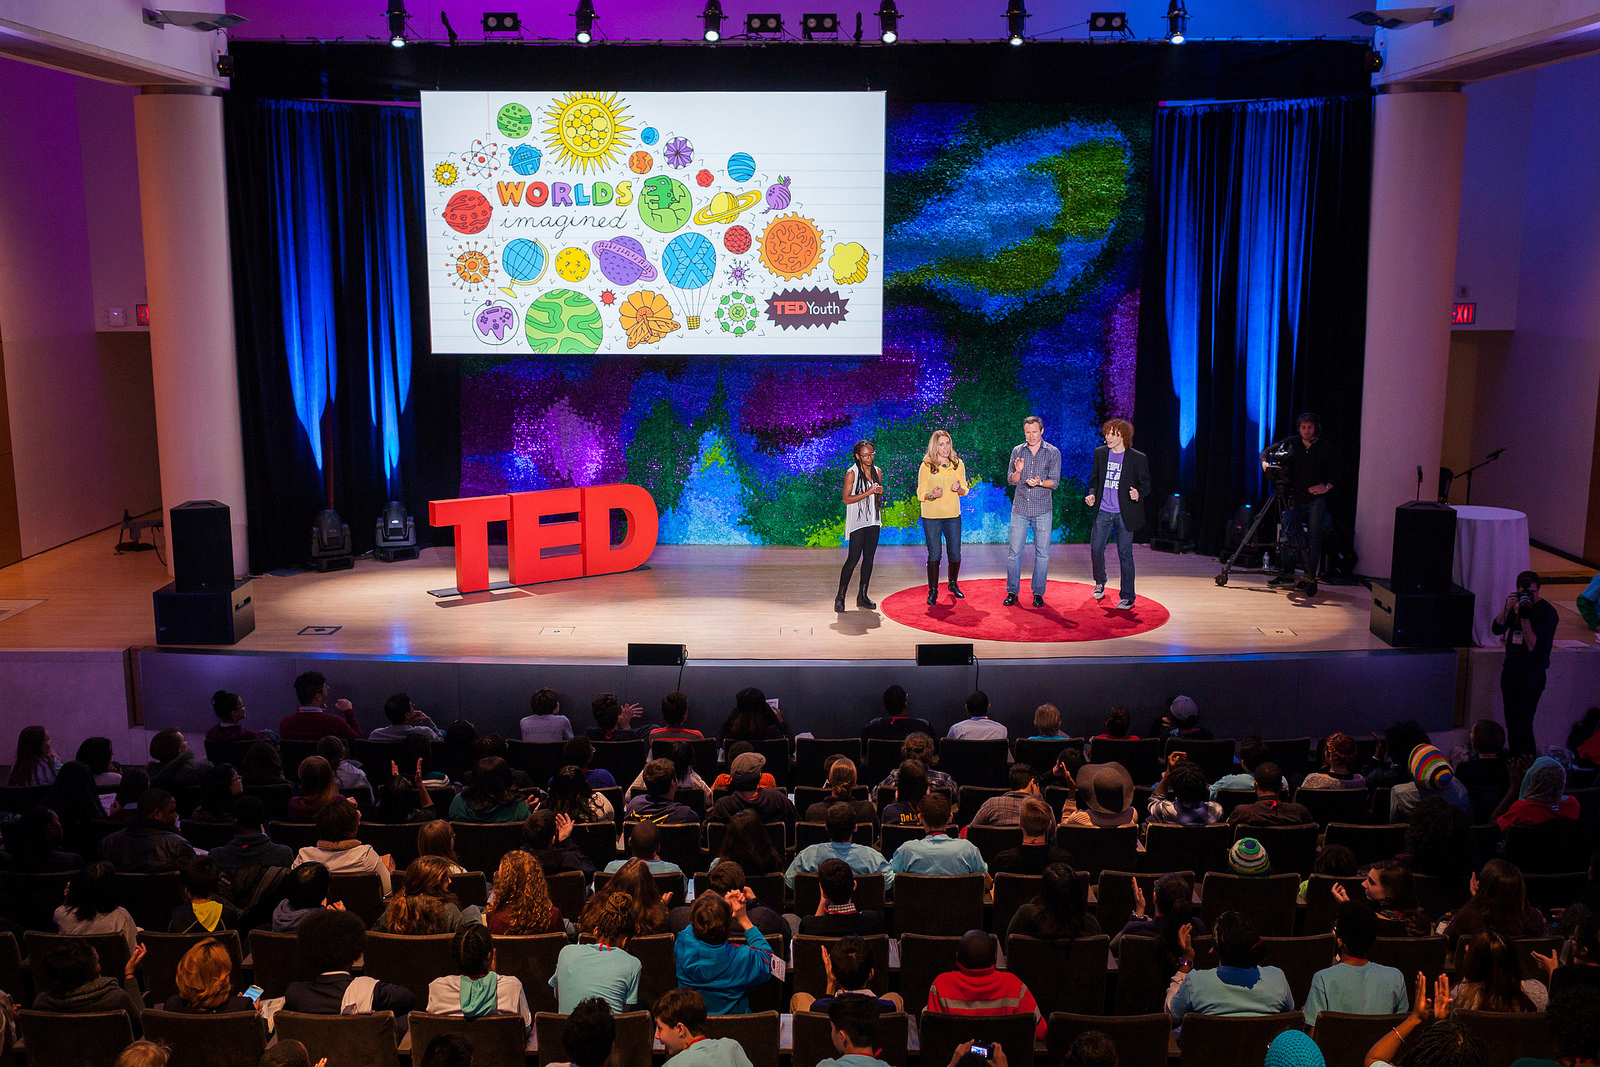 Students get jobs to do at TEDYouth. In 2014, two teens joined hosts Kelly Stoetzel and Rives on stage to introduce each speaker. Photo: Ryan Lash/TED